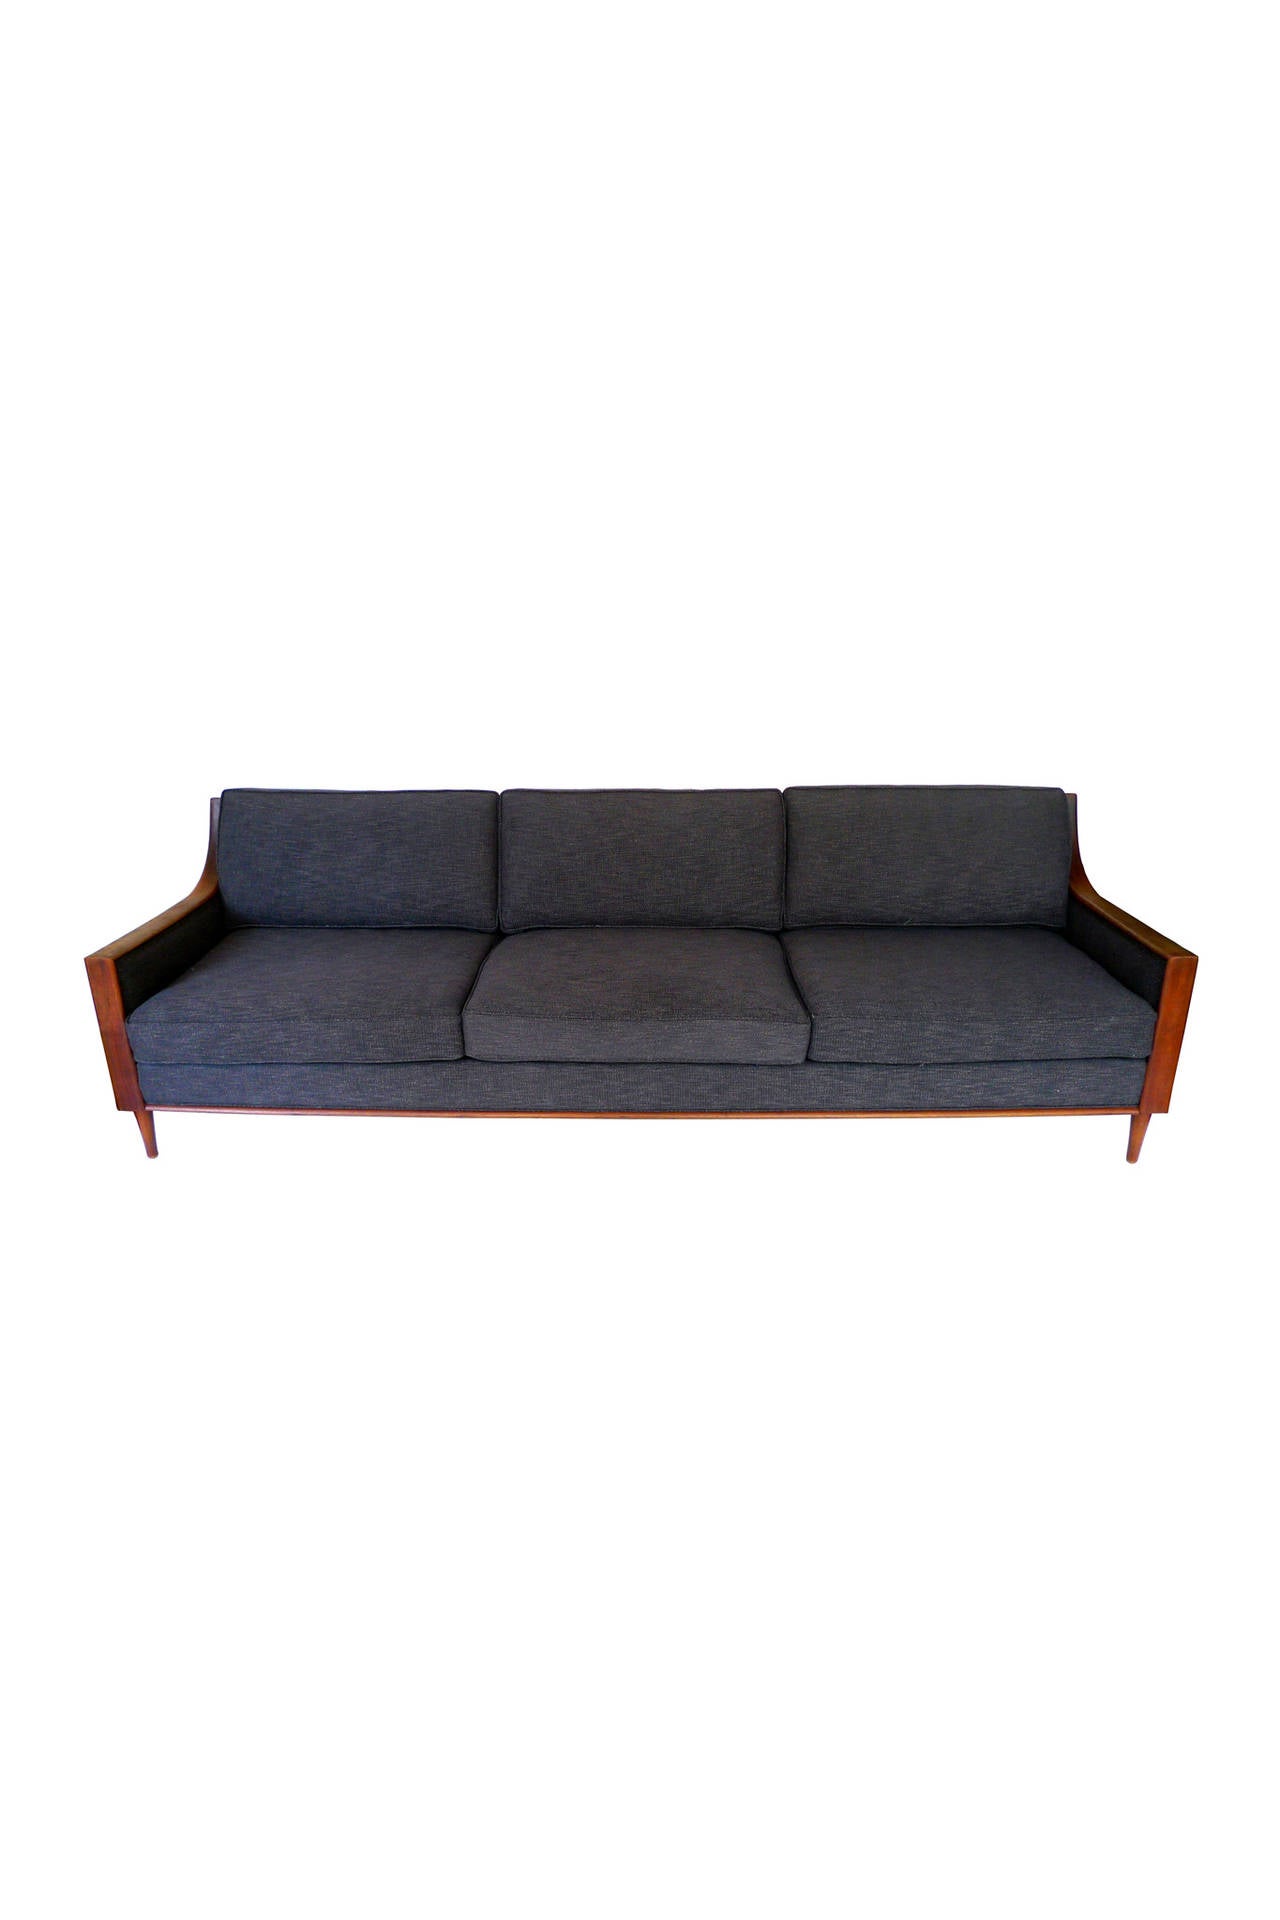 This handsome Mid-Century sofa is newly re-cushioned and reupholstered in dark, bluish gray cotton from Duralee. The arms are a beautiful deep brown teak and dramatically slope up to the back. The six-inch legs are also teak and taper downward. This